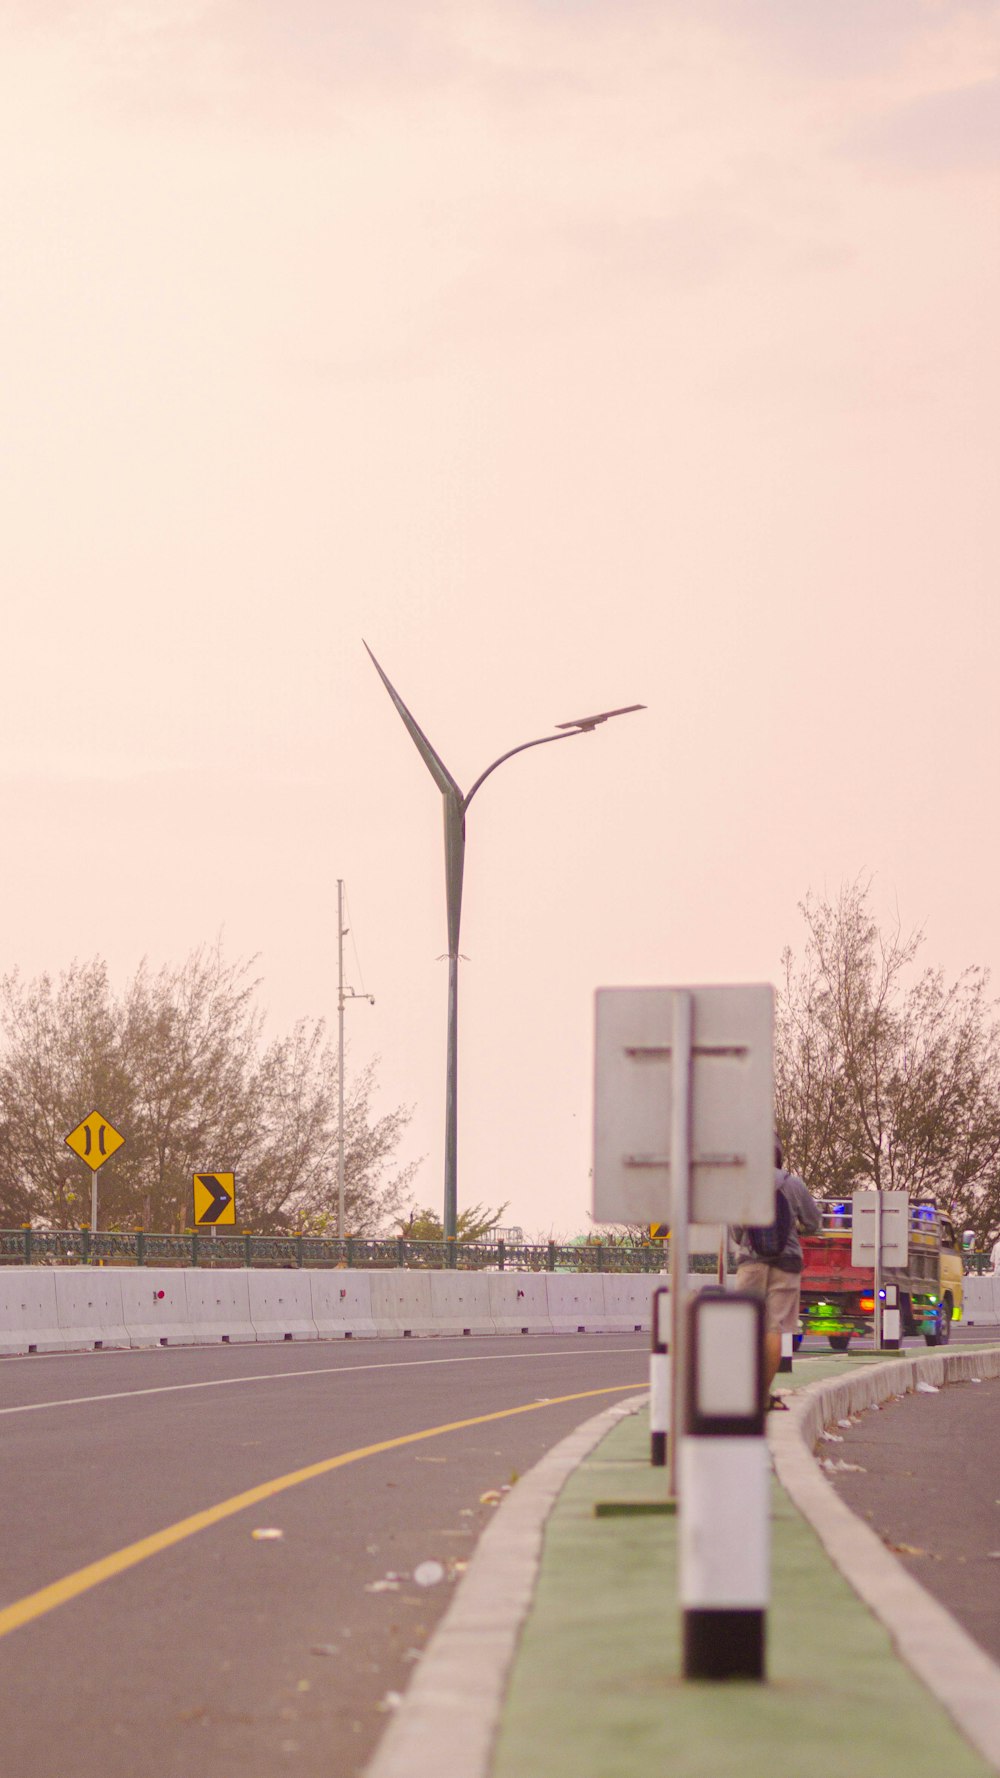 a street with a street sign and a wind turbine in the background